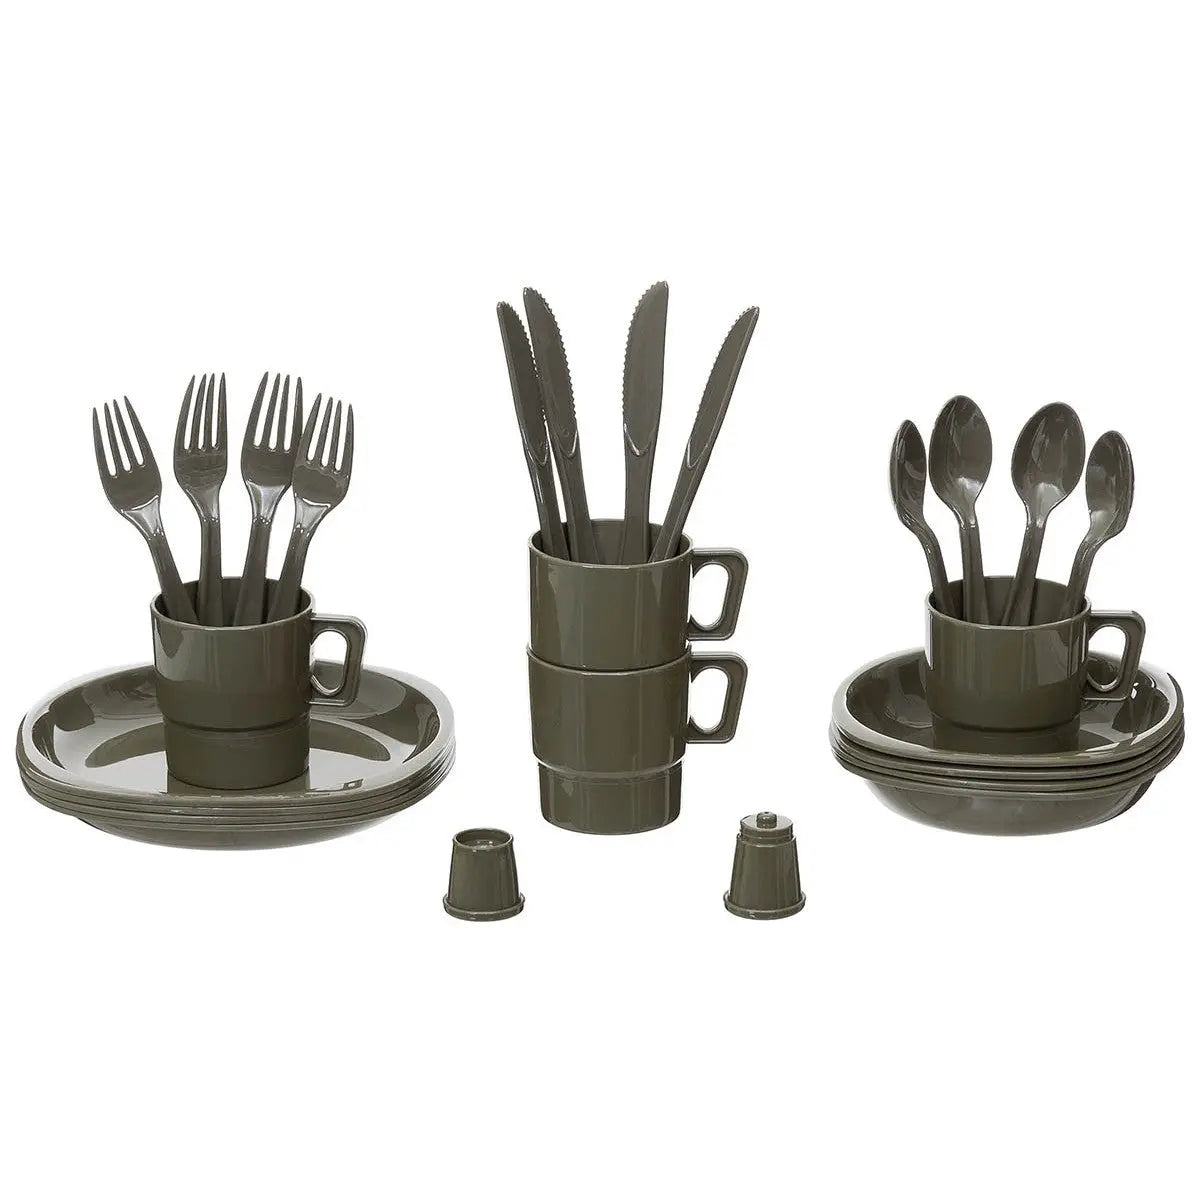 Camping cookware set 26 pcs OLIVE NSO Gear Cookware